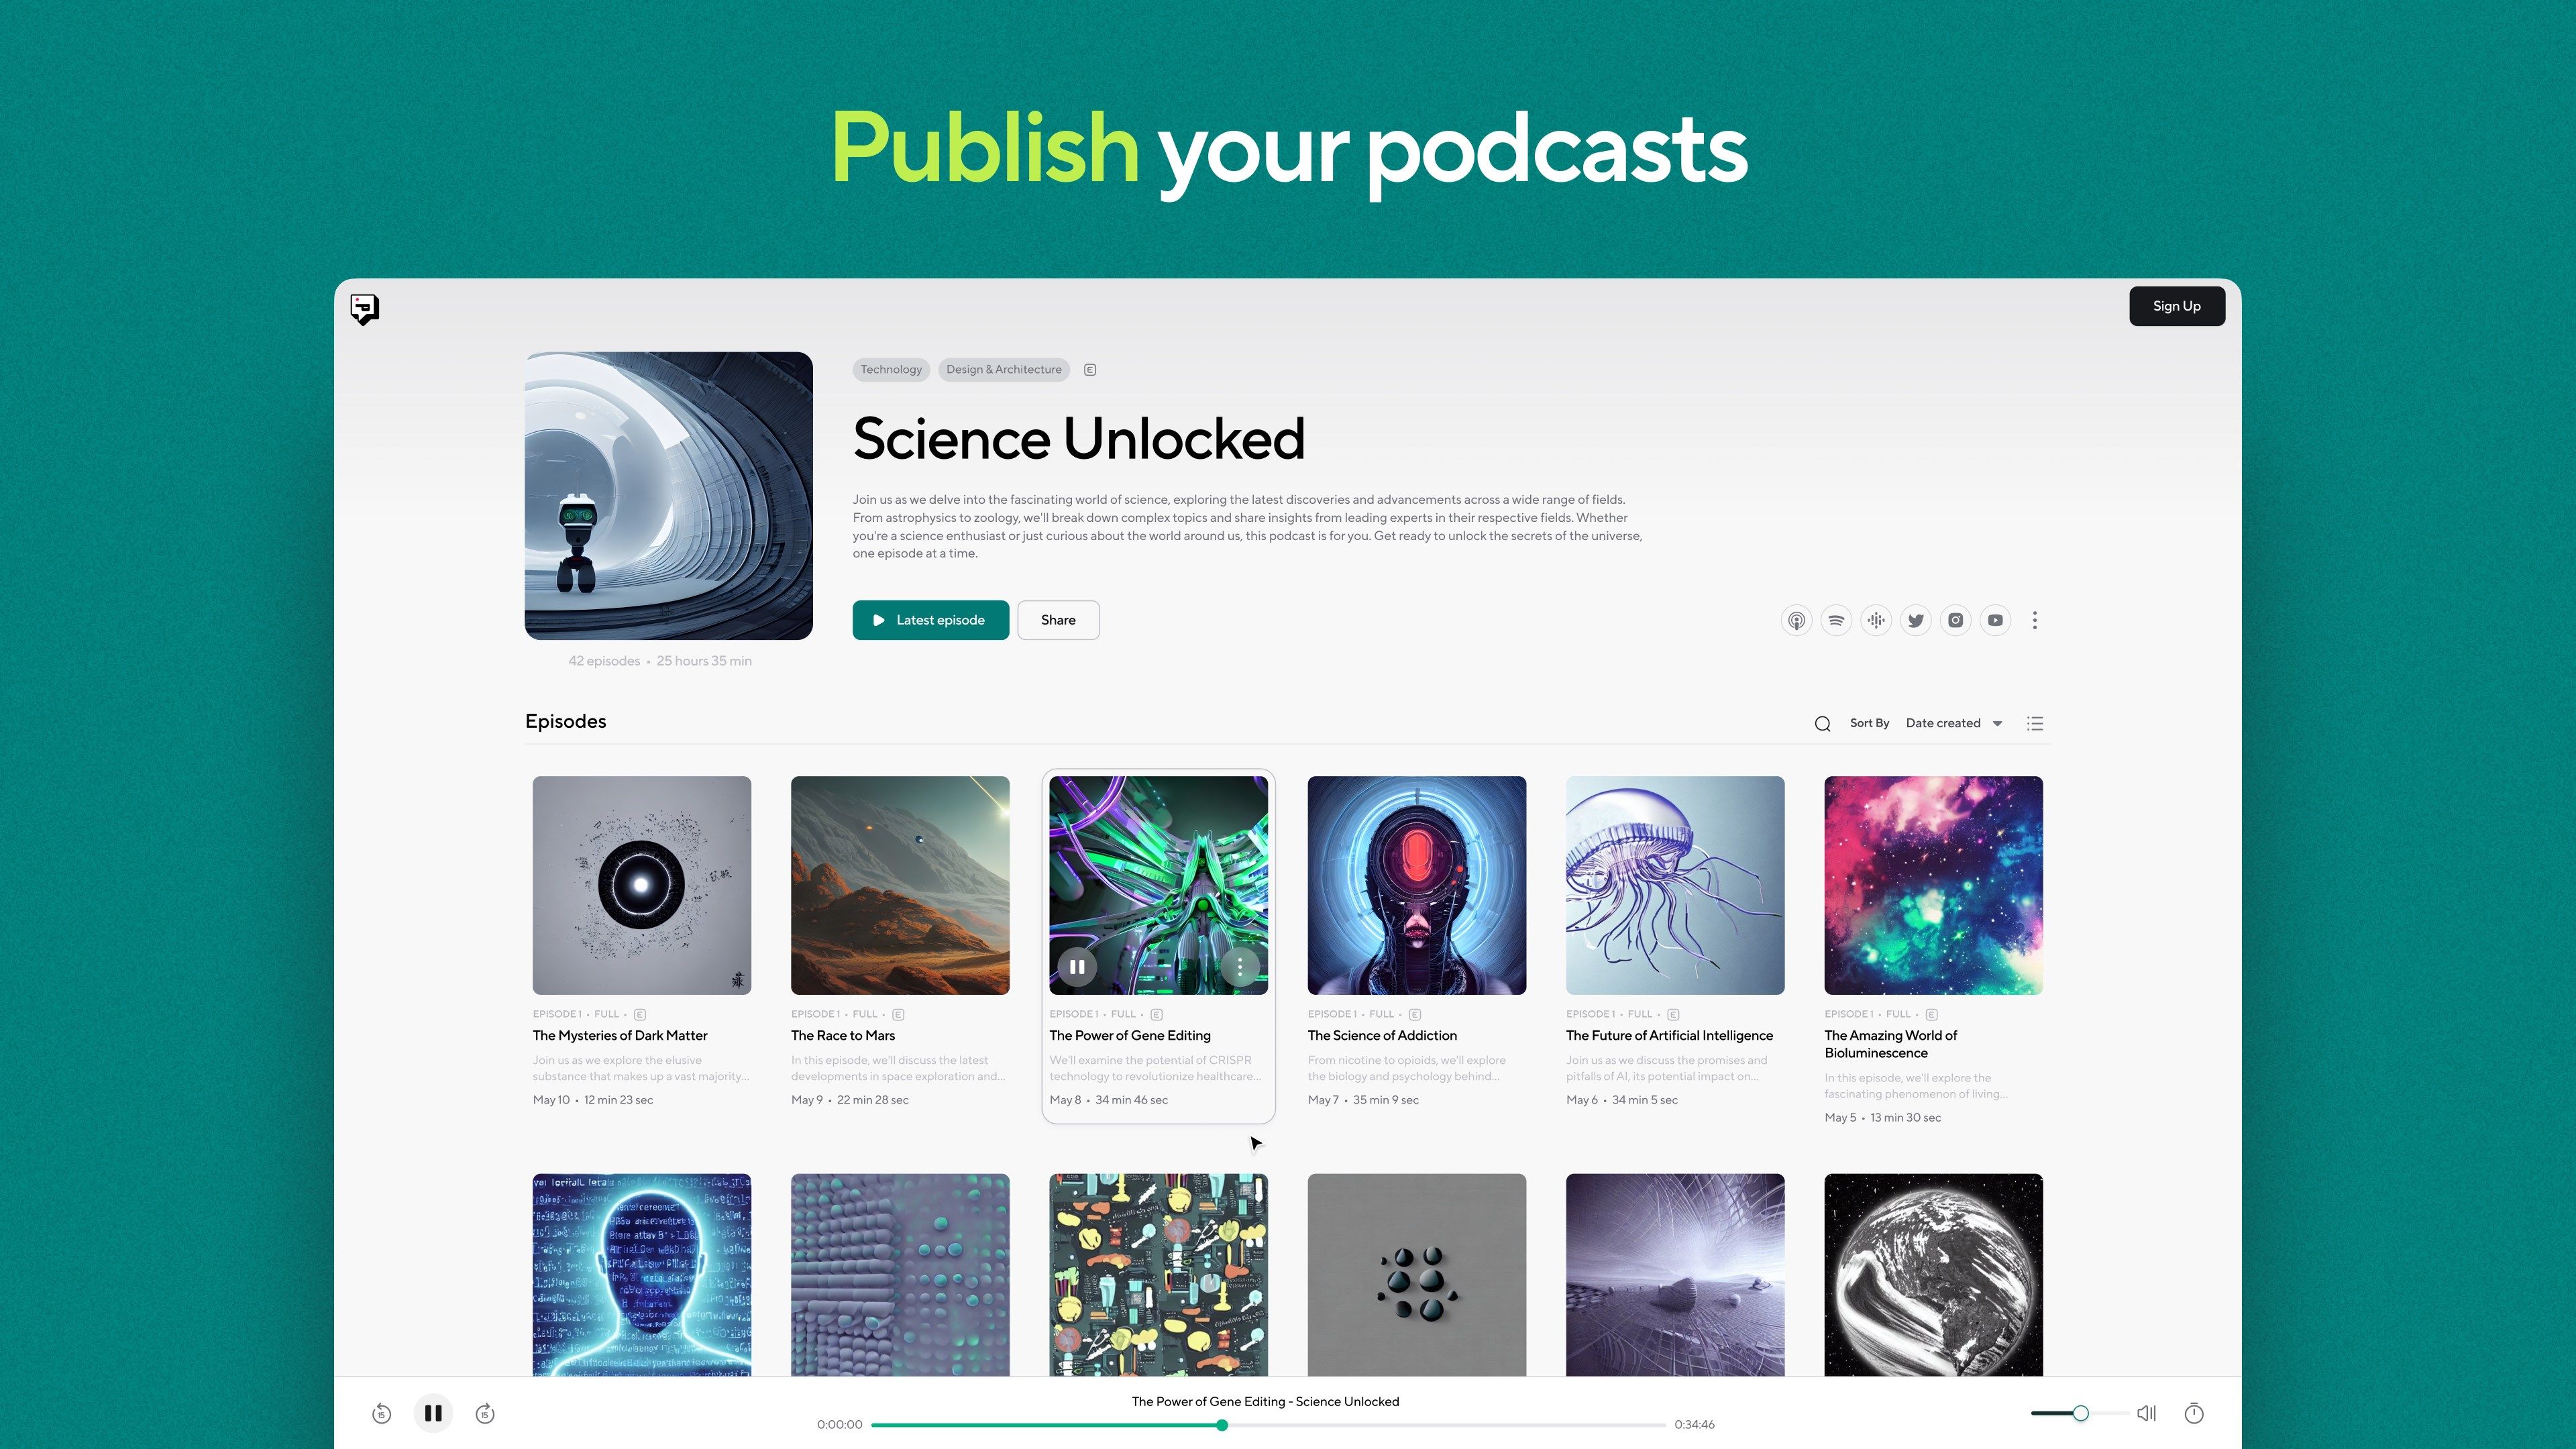 Publish your podcasts